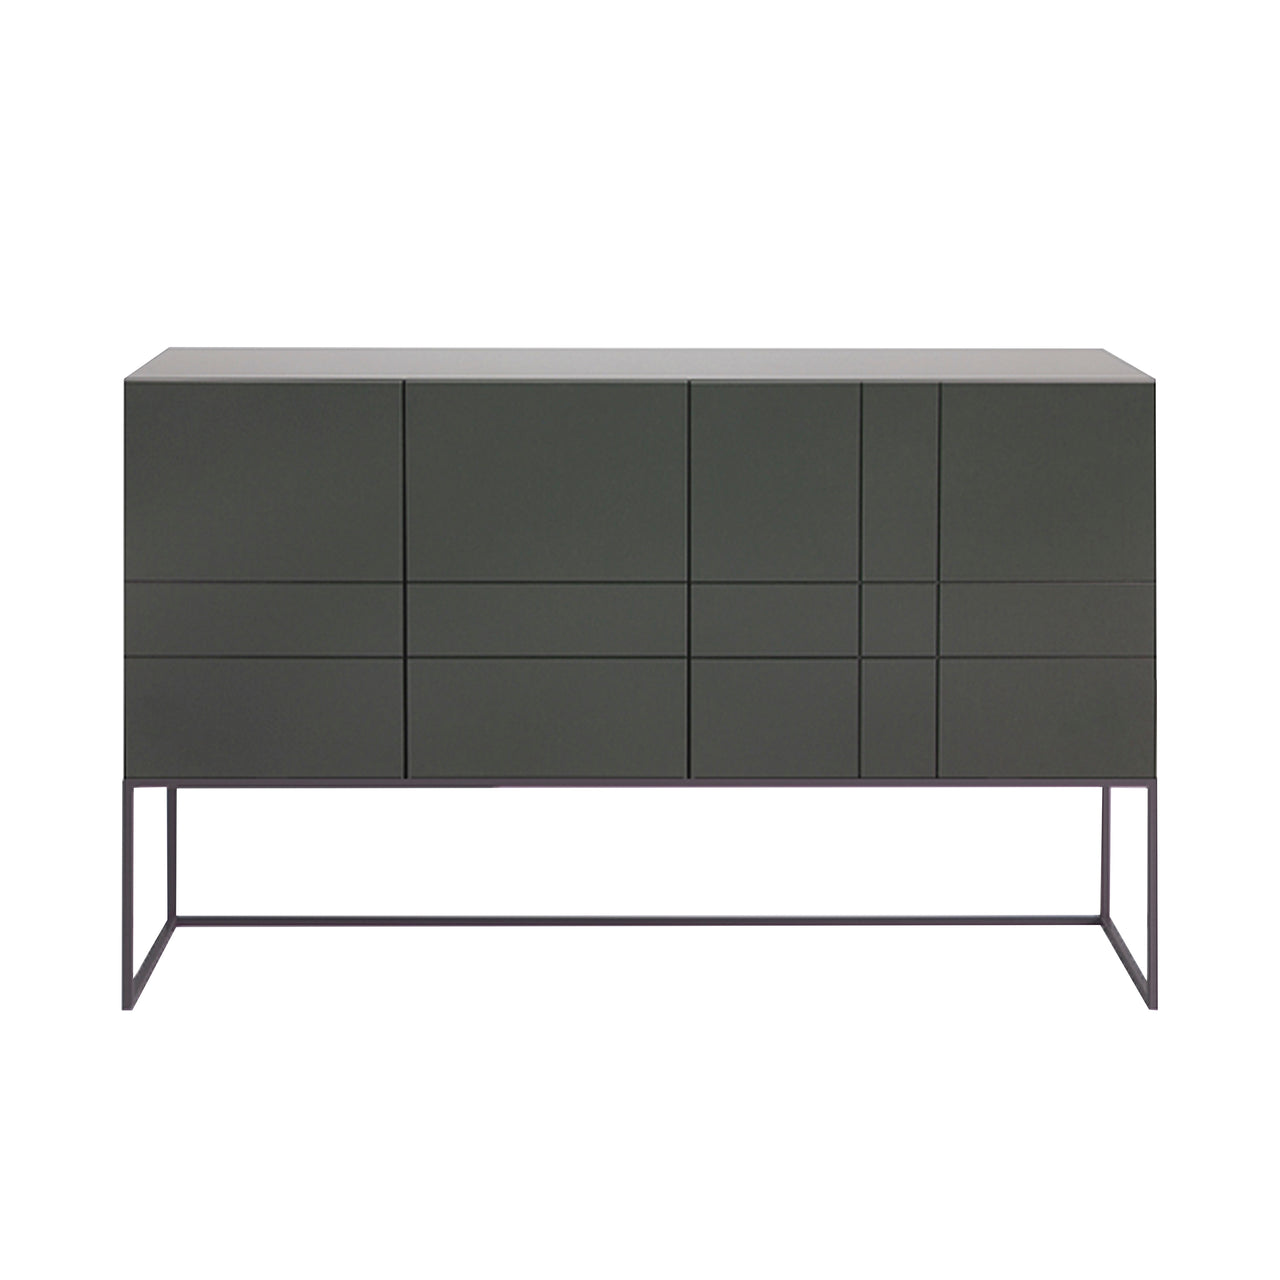 Kilt Light 137 Cabinet with Drawers: Taupe